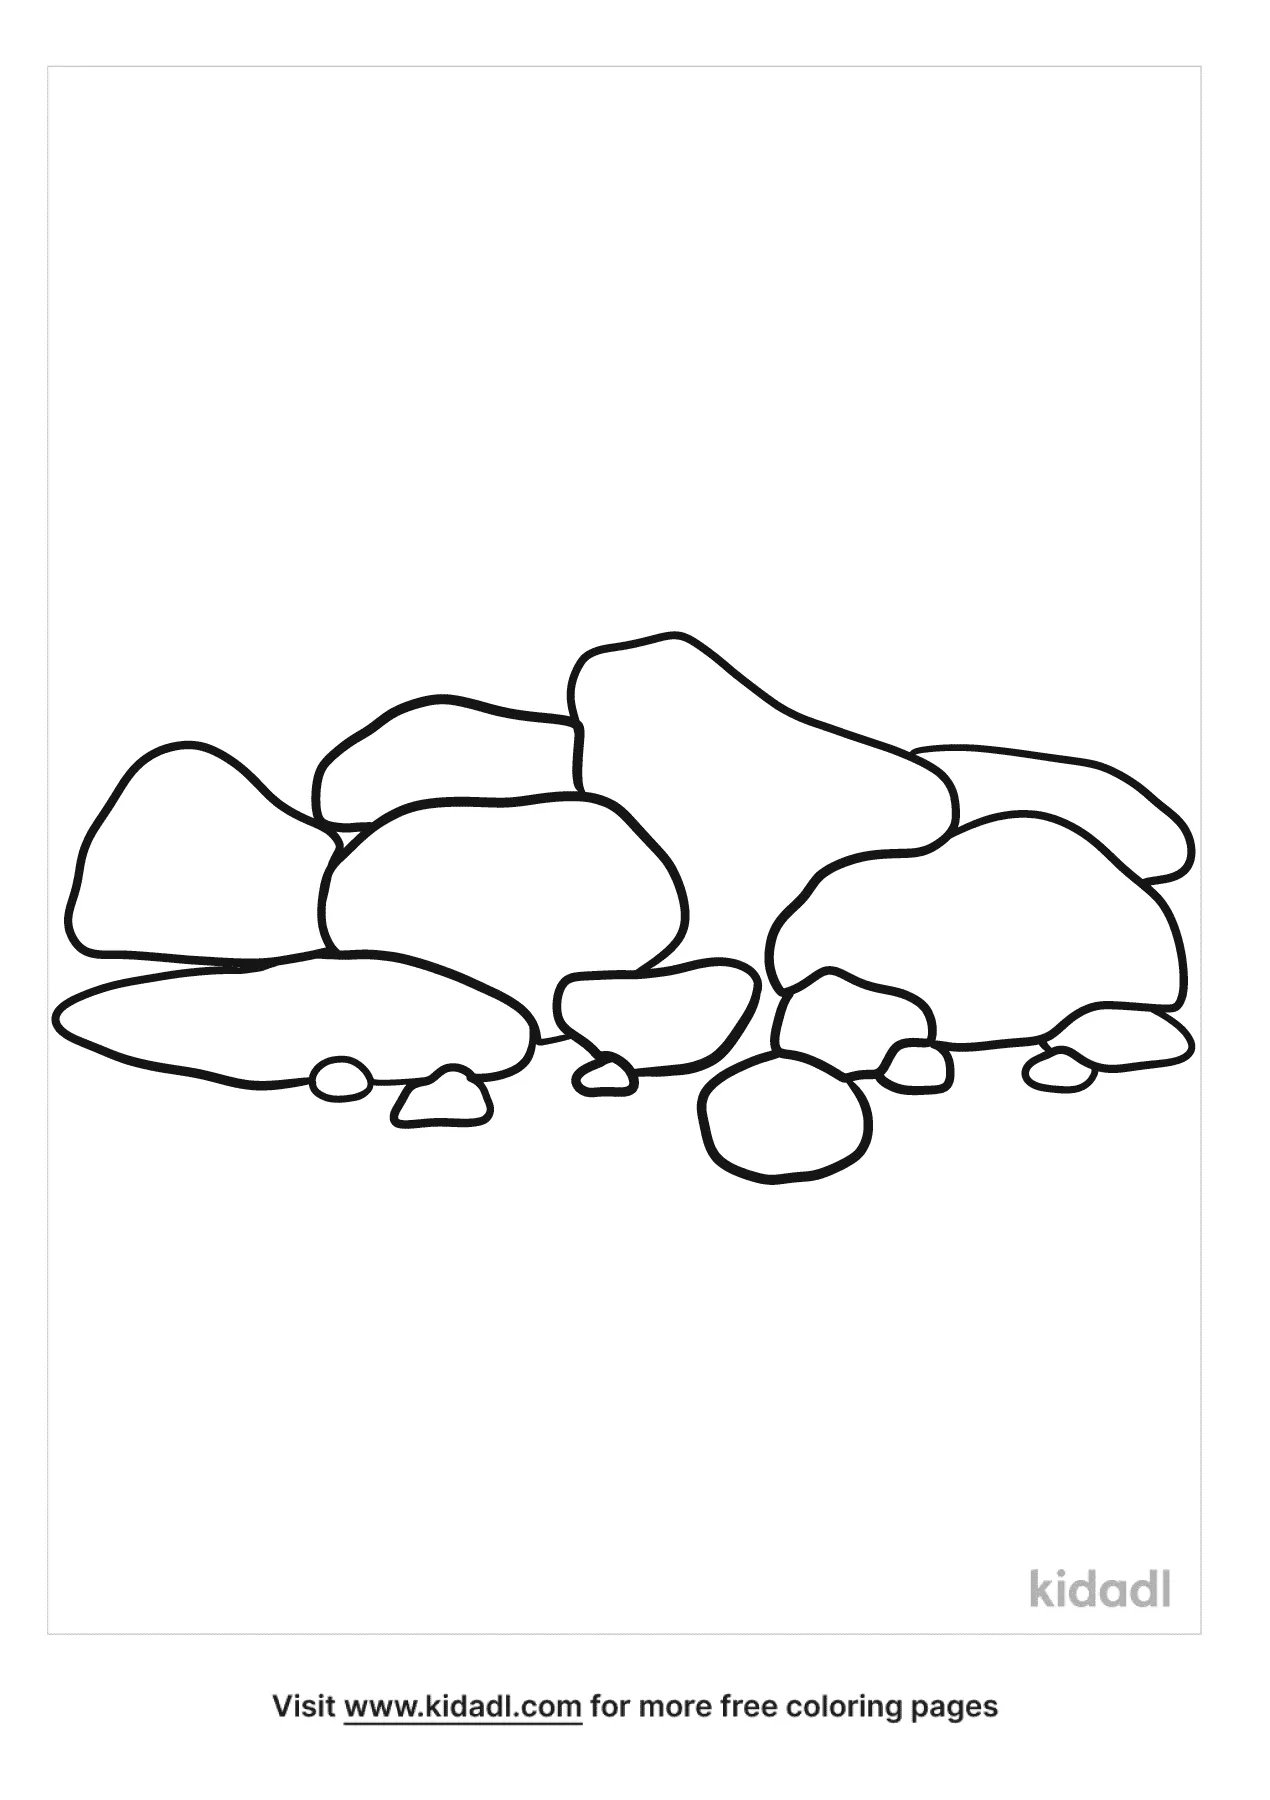 Free rock pile coloring page coloring page printables